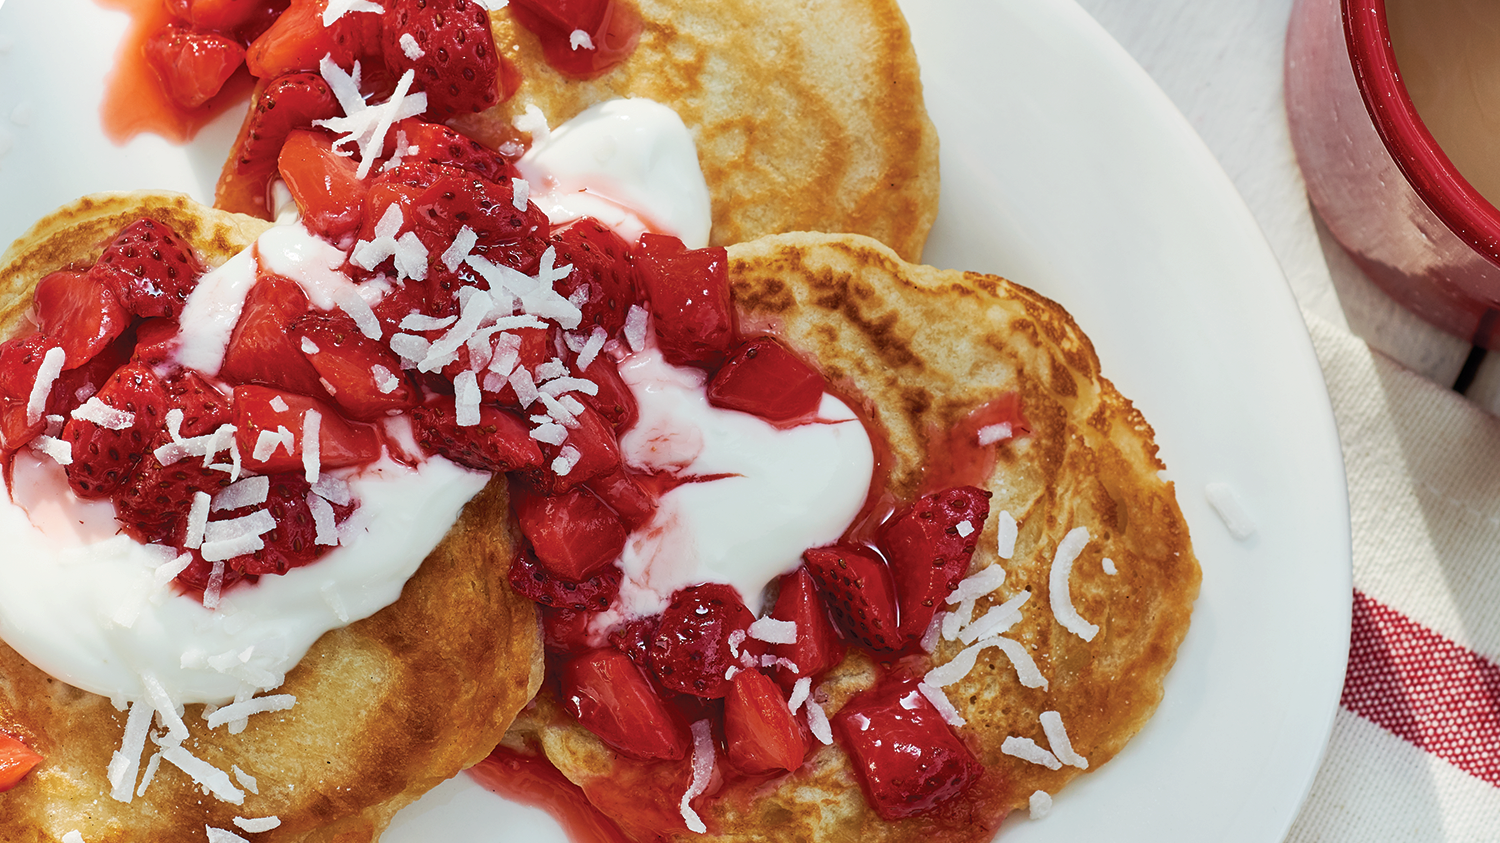 Coconut Pancakes & Strawberry Compote